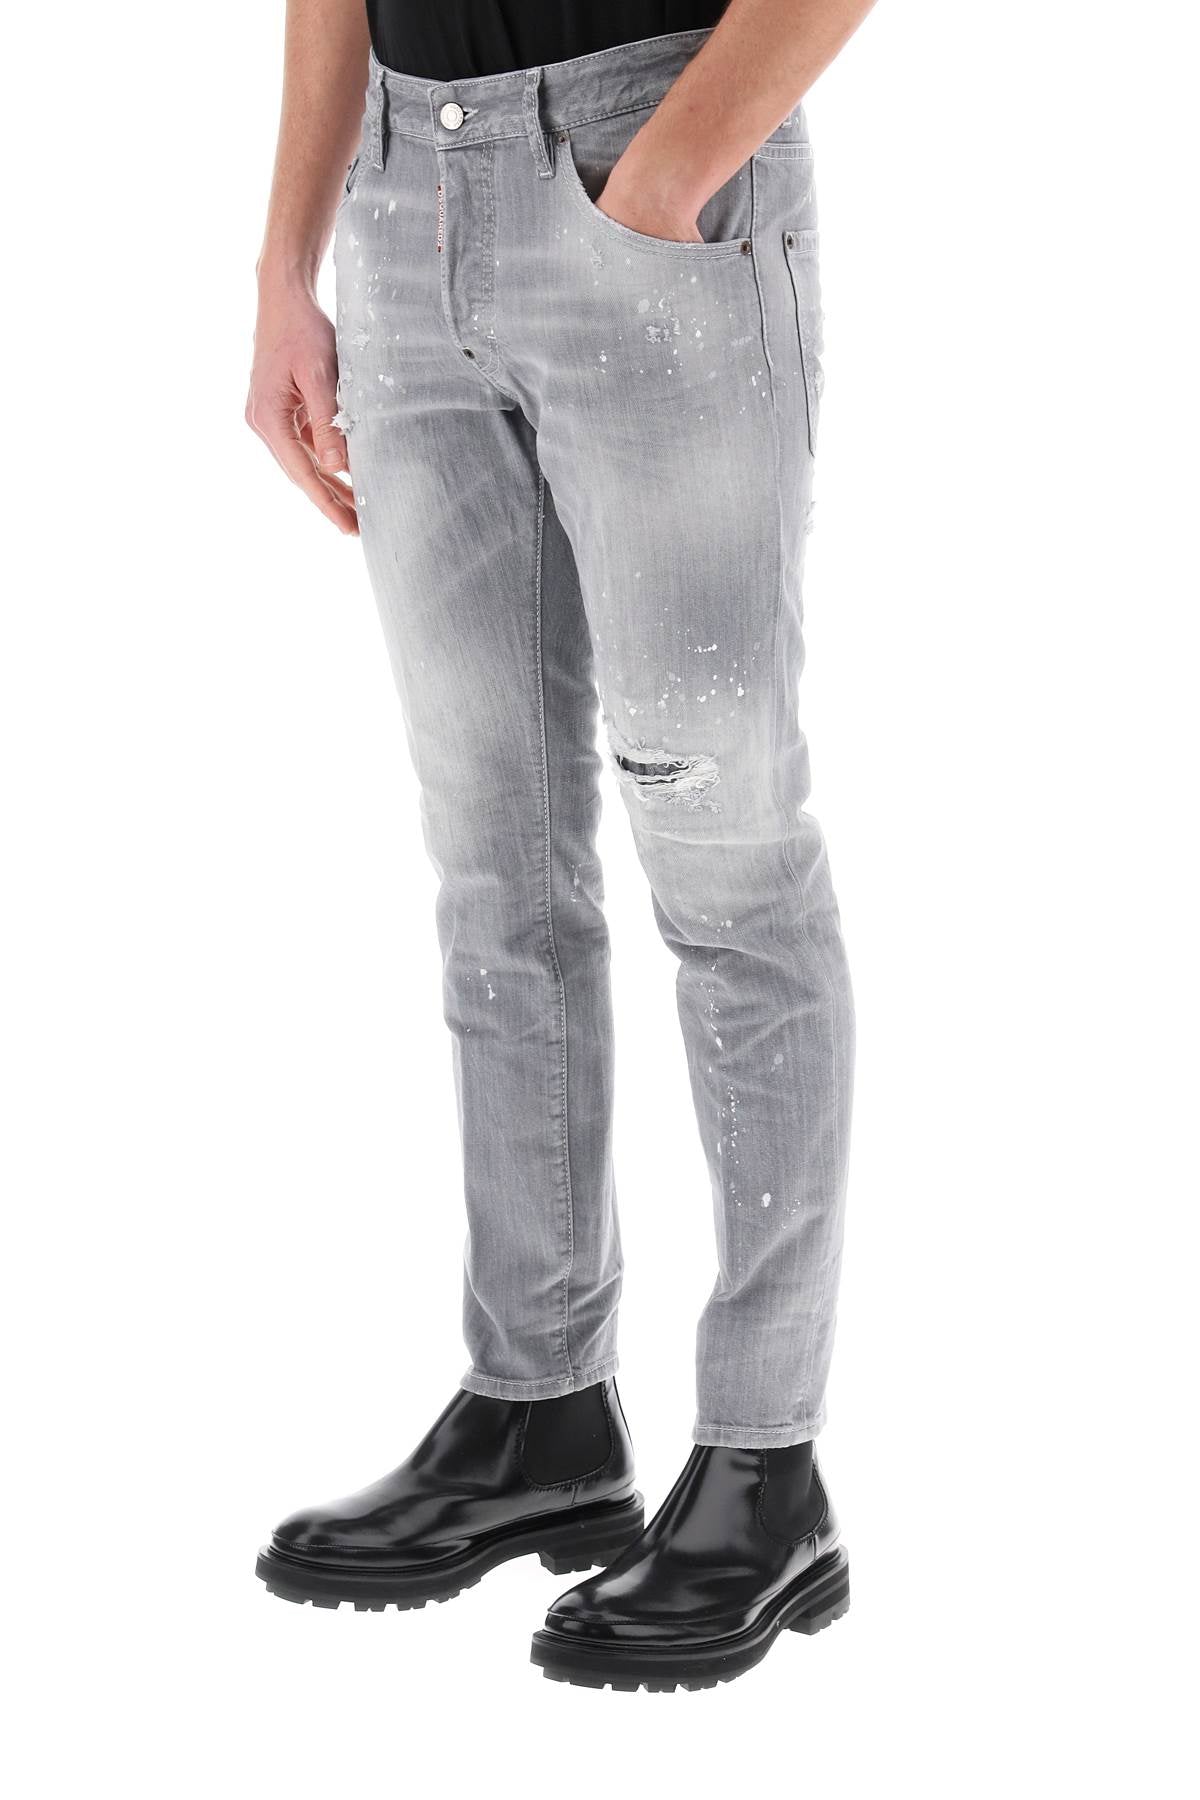 Dsquared2 skater jeans in grey spotted wash-3